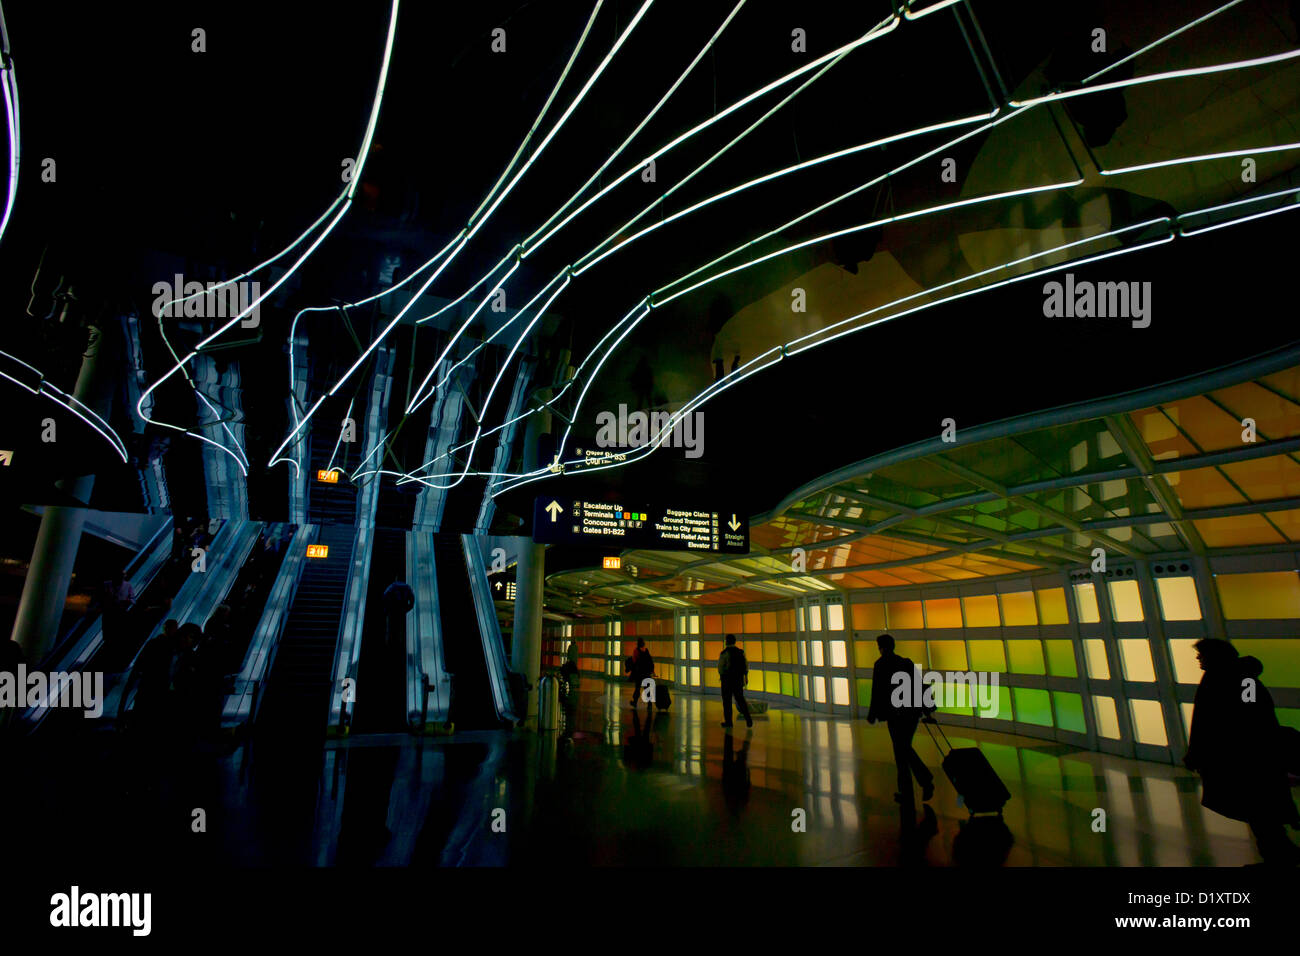 Connecting walkway at O'Hare International Airport, Chicago, Illinois, USA Stock Photo